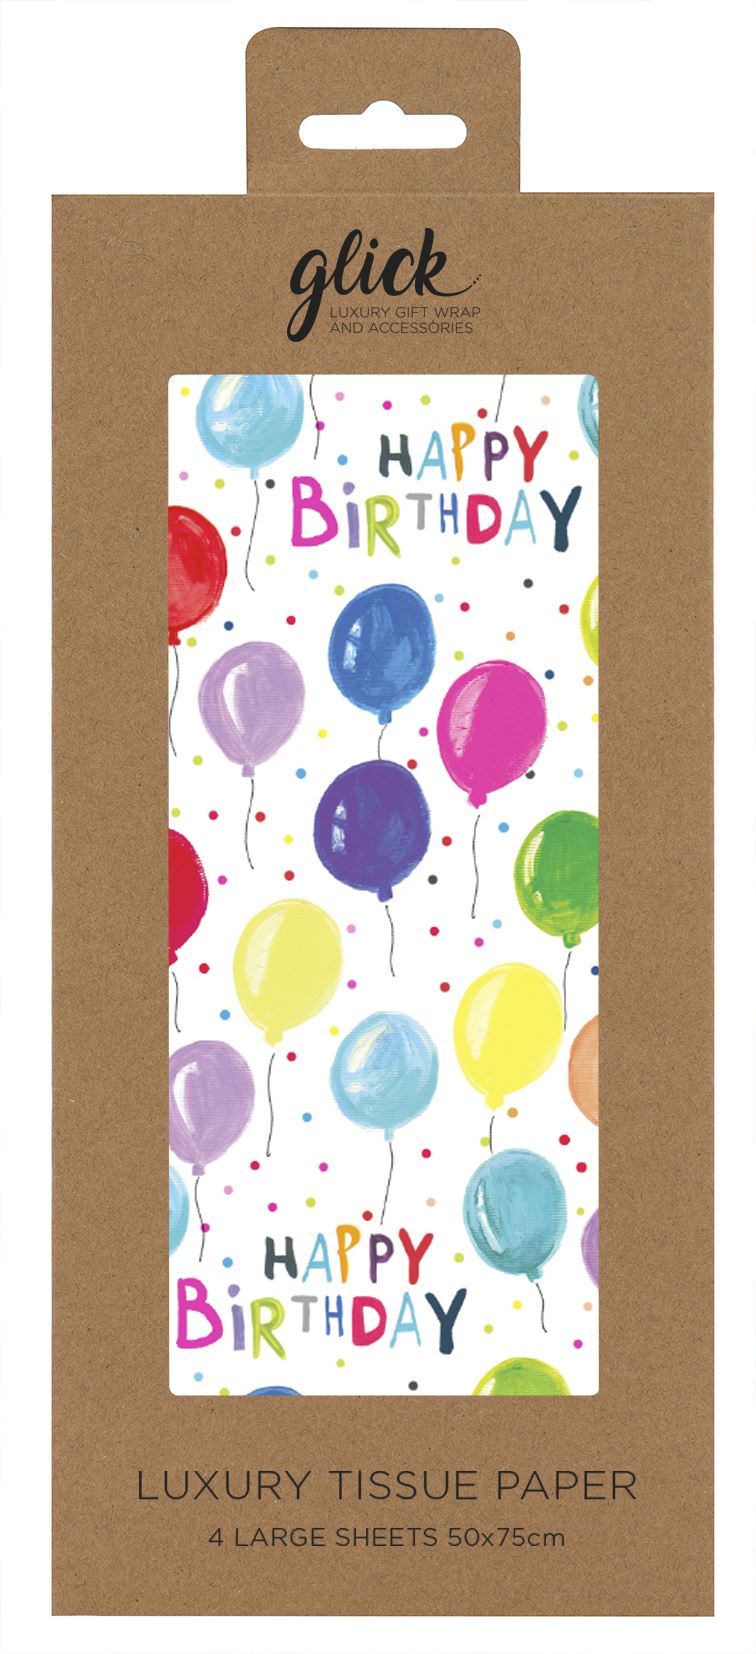 Retail packaging for a rectangular sheet of tissue paper with a white background covered in a rainbow of coloured balloons with strings dangling. The white background also has some multicoloured spots embellishing it and the words Happy Birthday in a haphazard type.